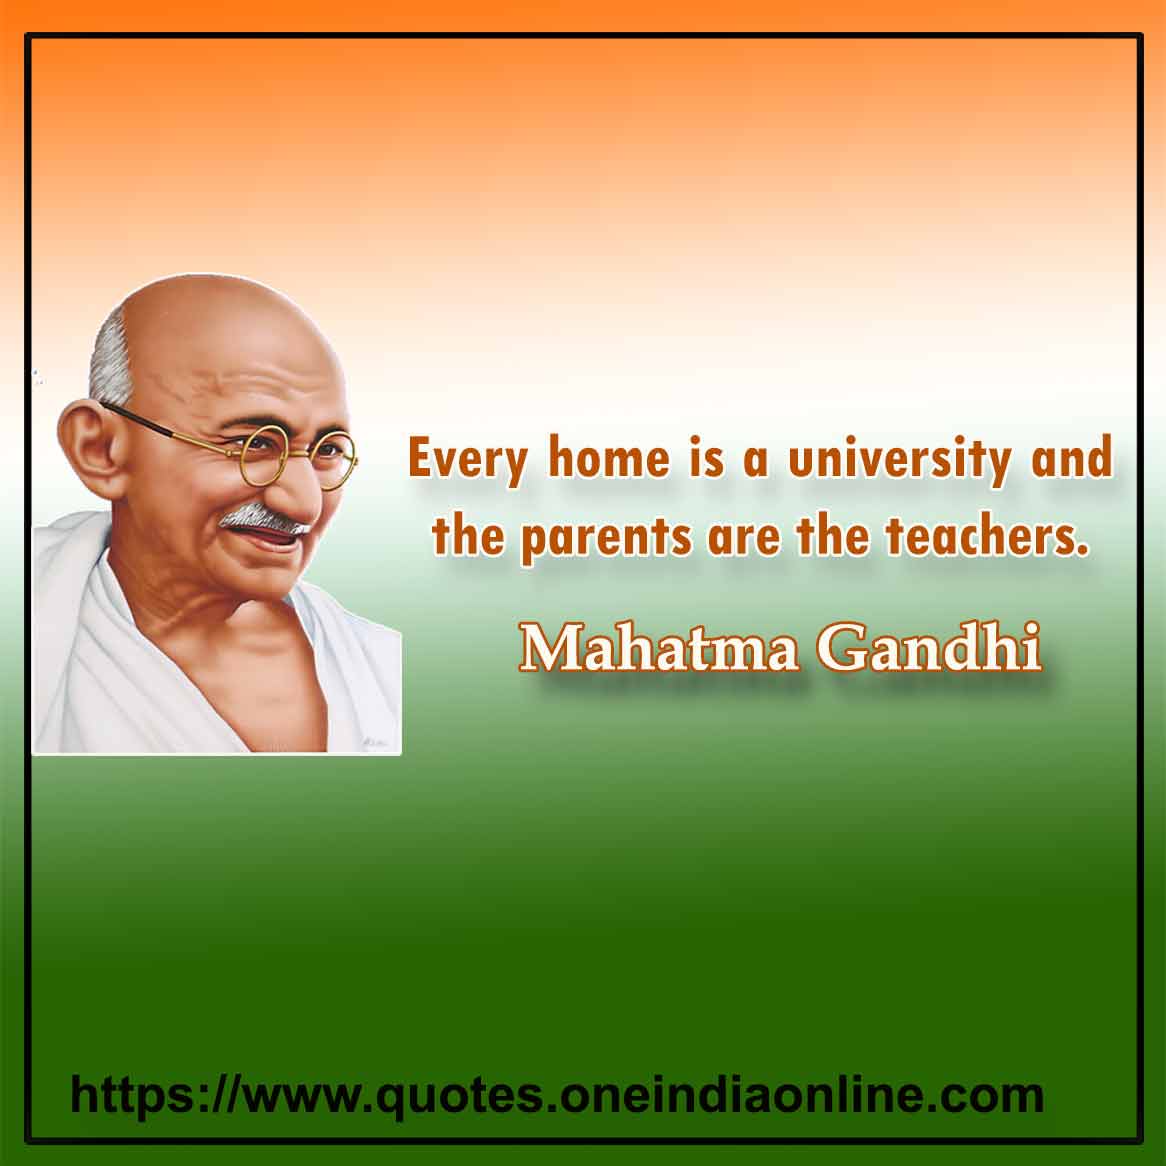 Every home is a university and the parents are the teachers.